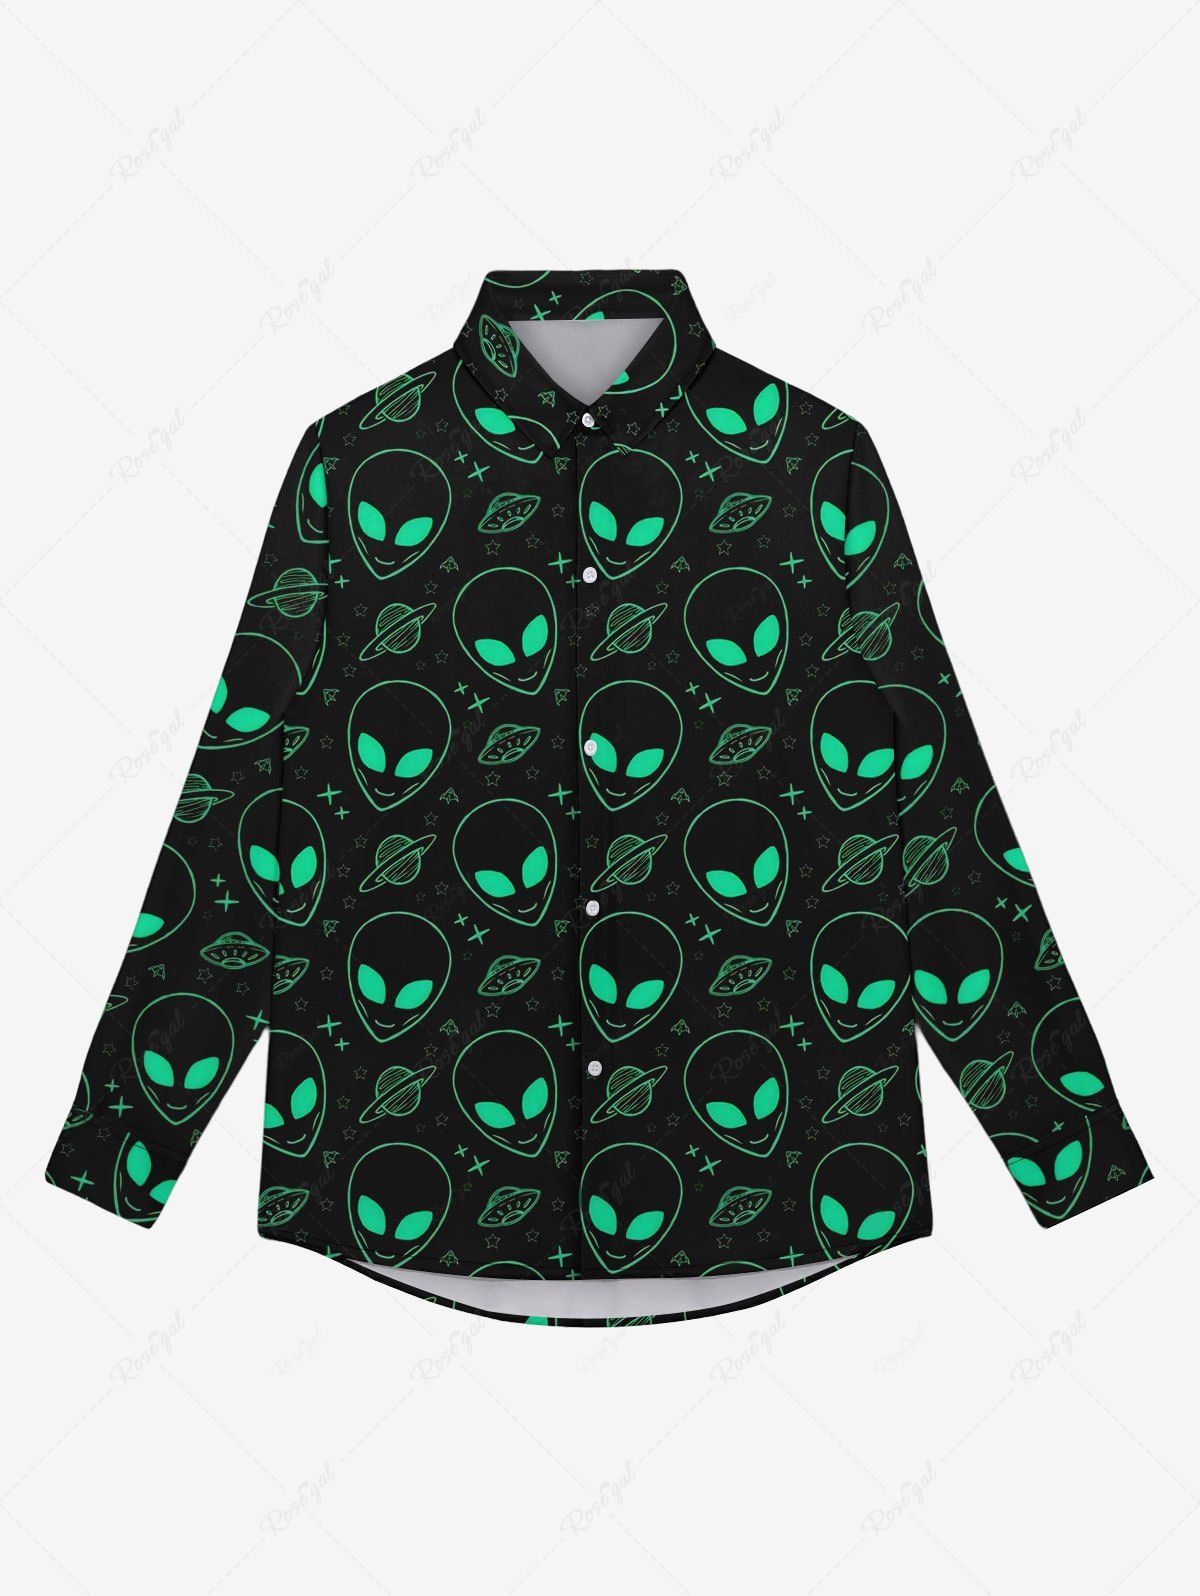 New Gothic Turn-down Collar Alien UFO Planet Print Buttons Shirt For Men  